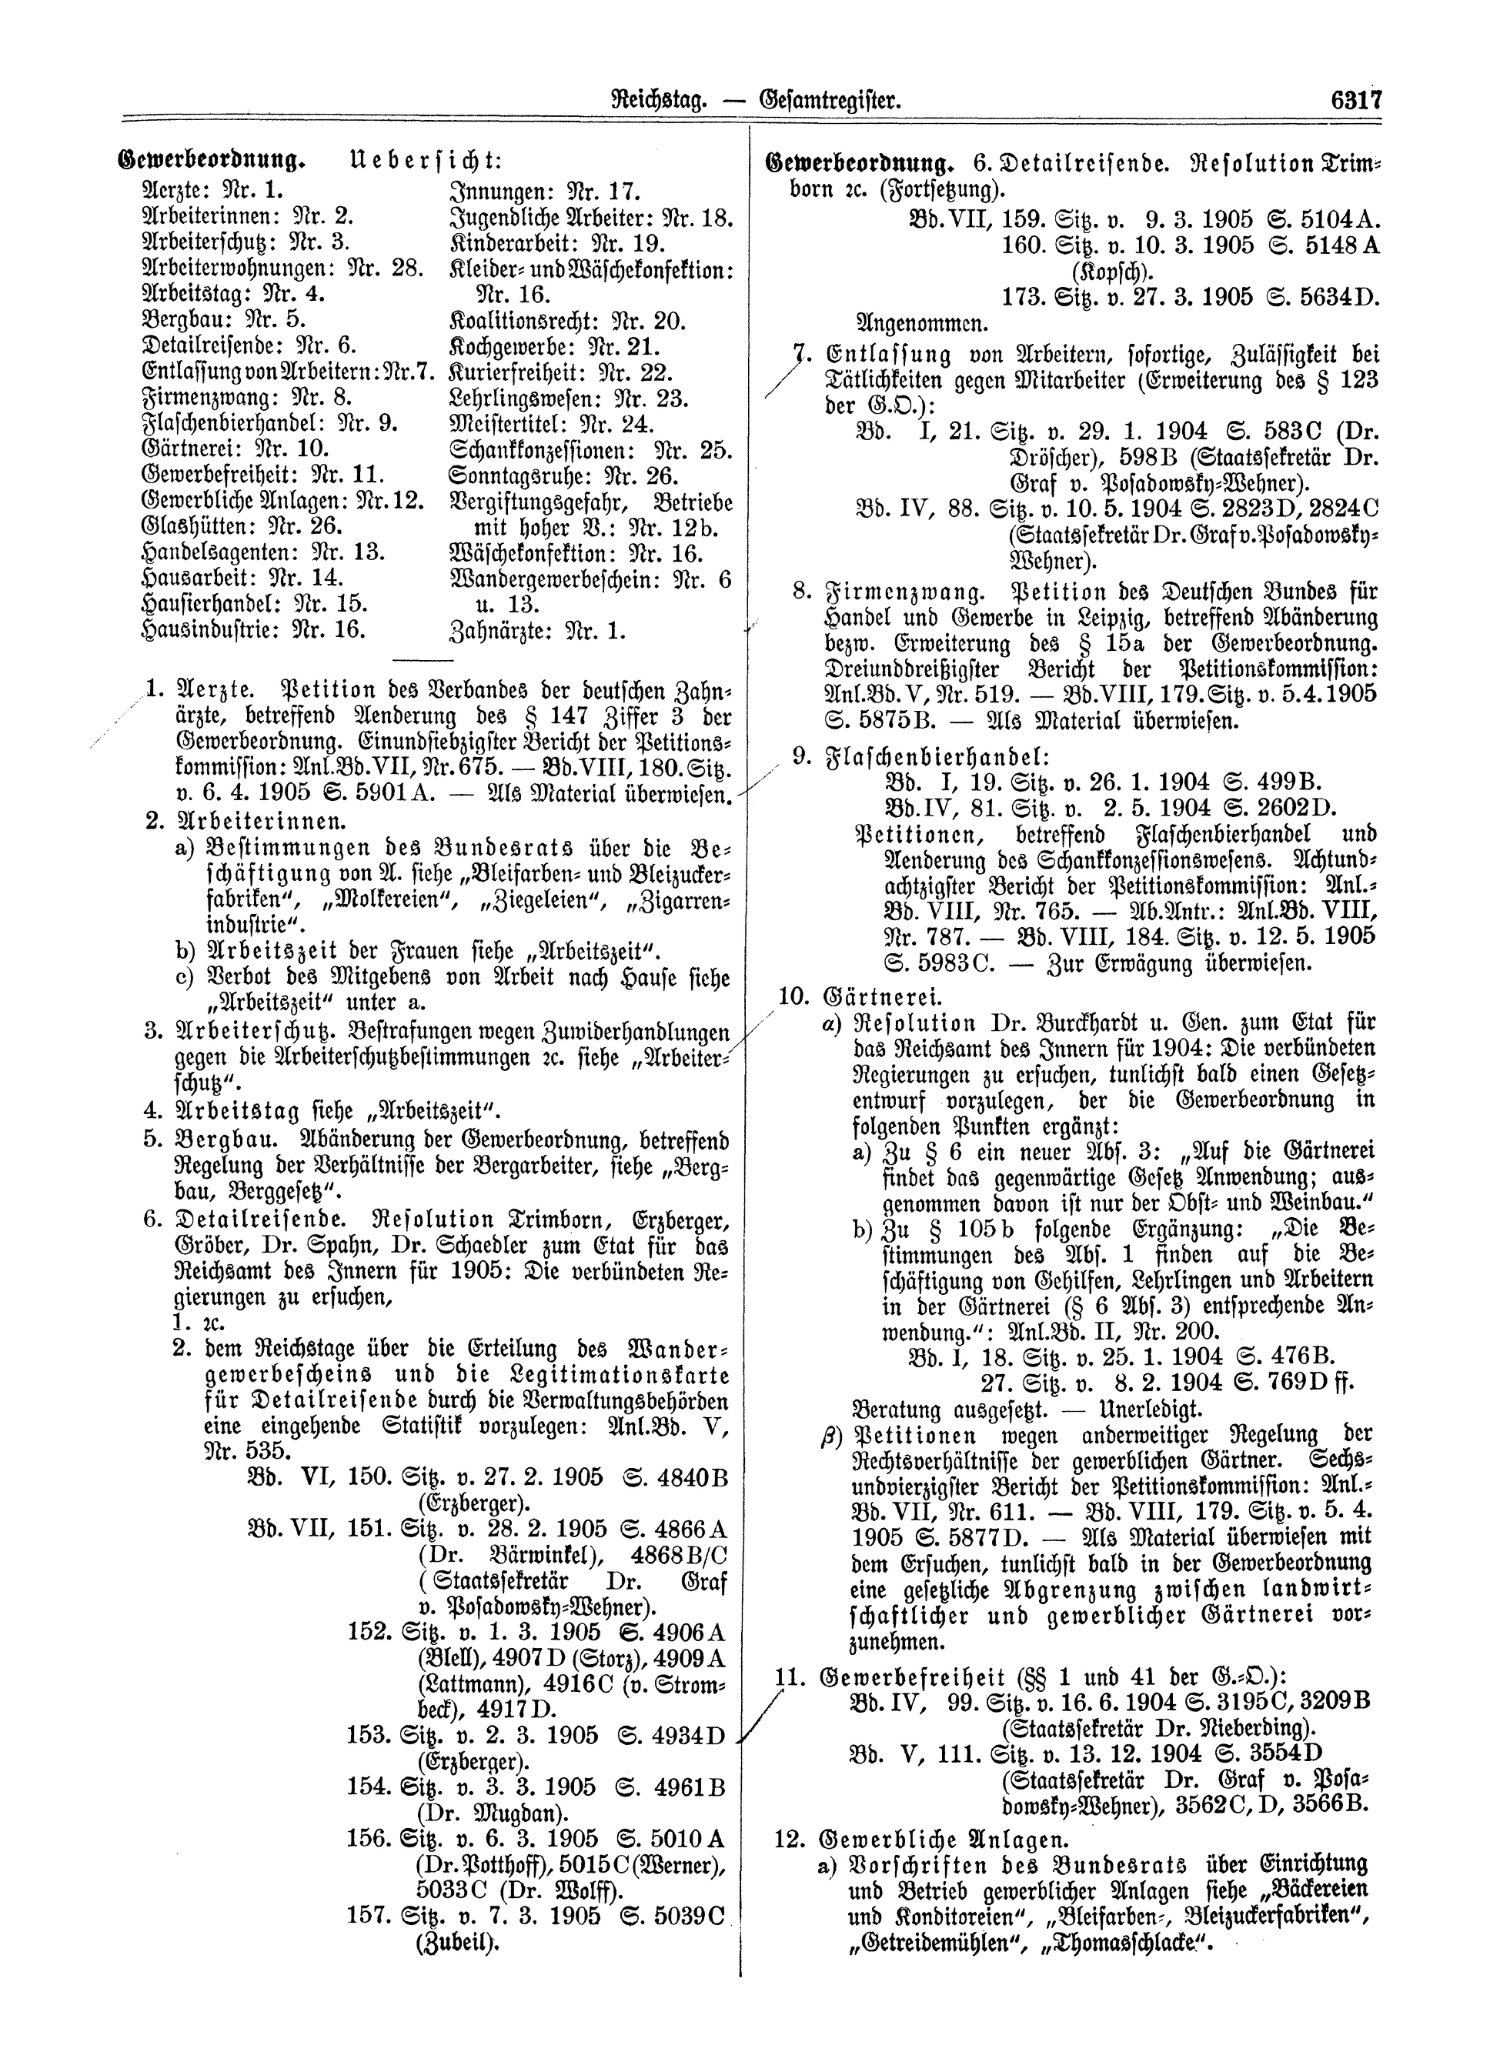 Scan of page 6317